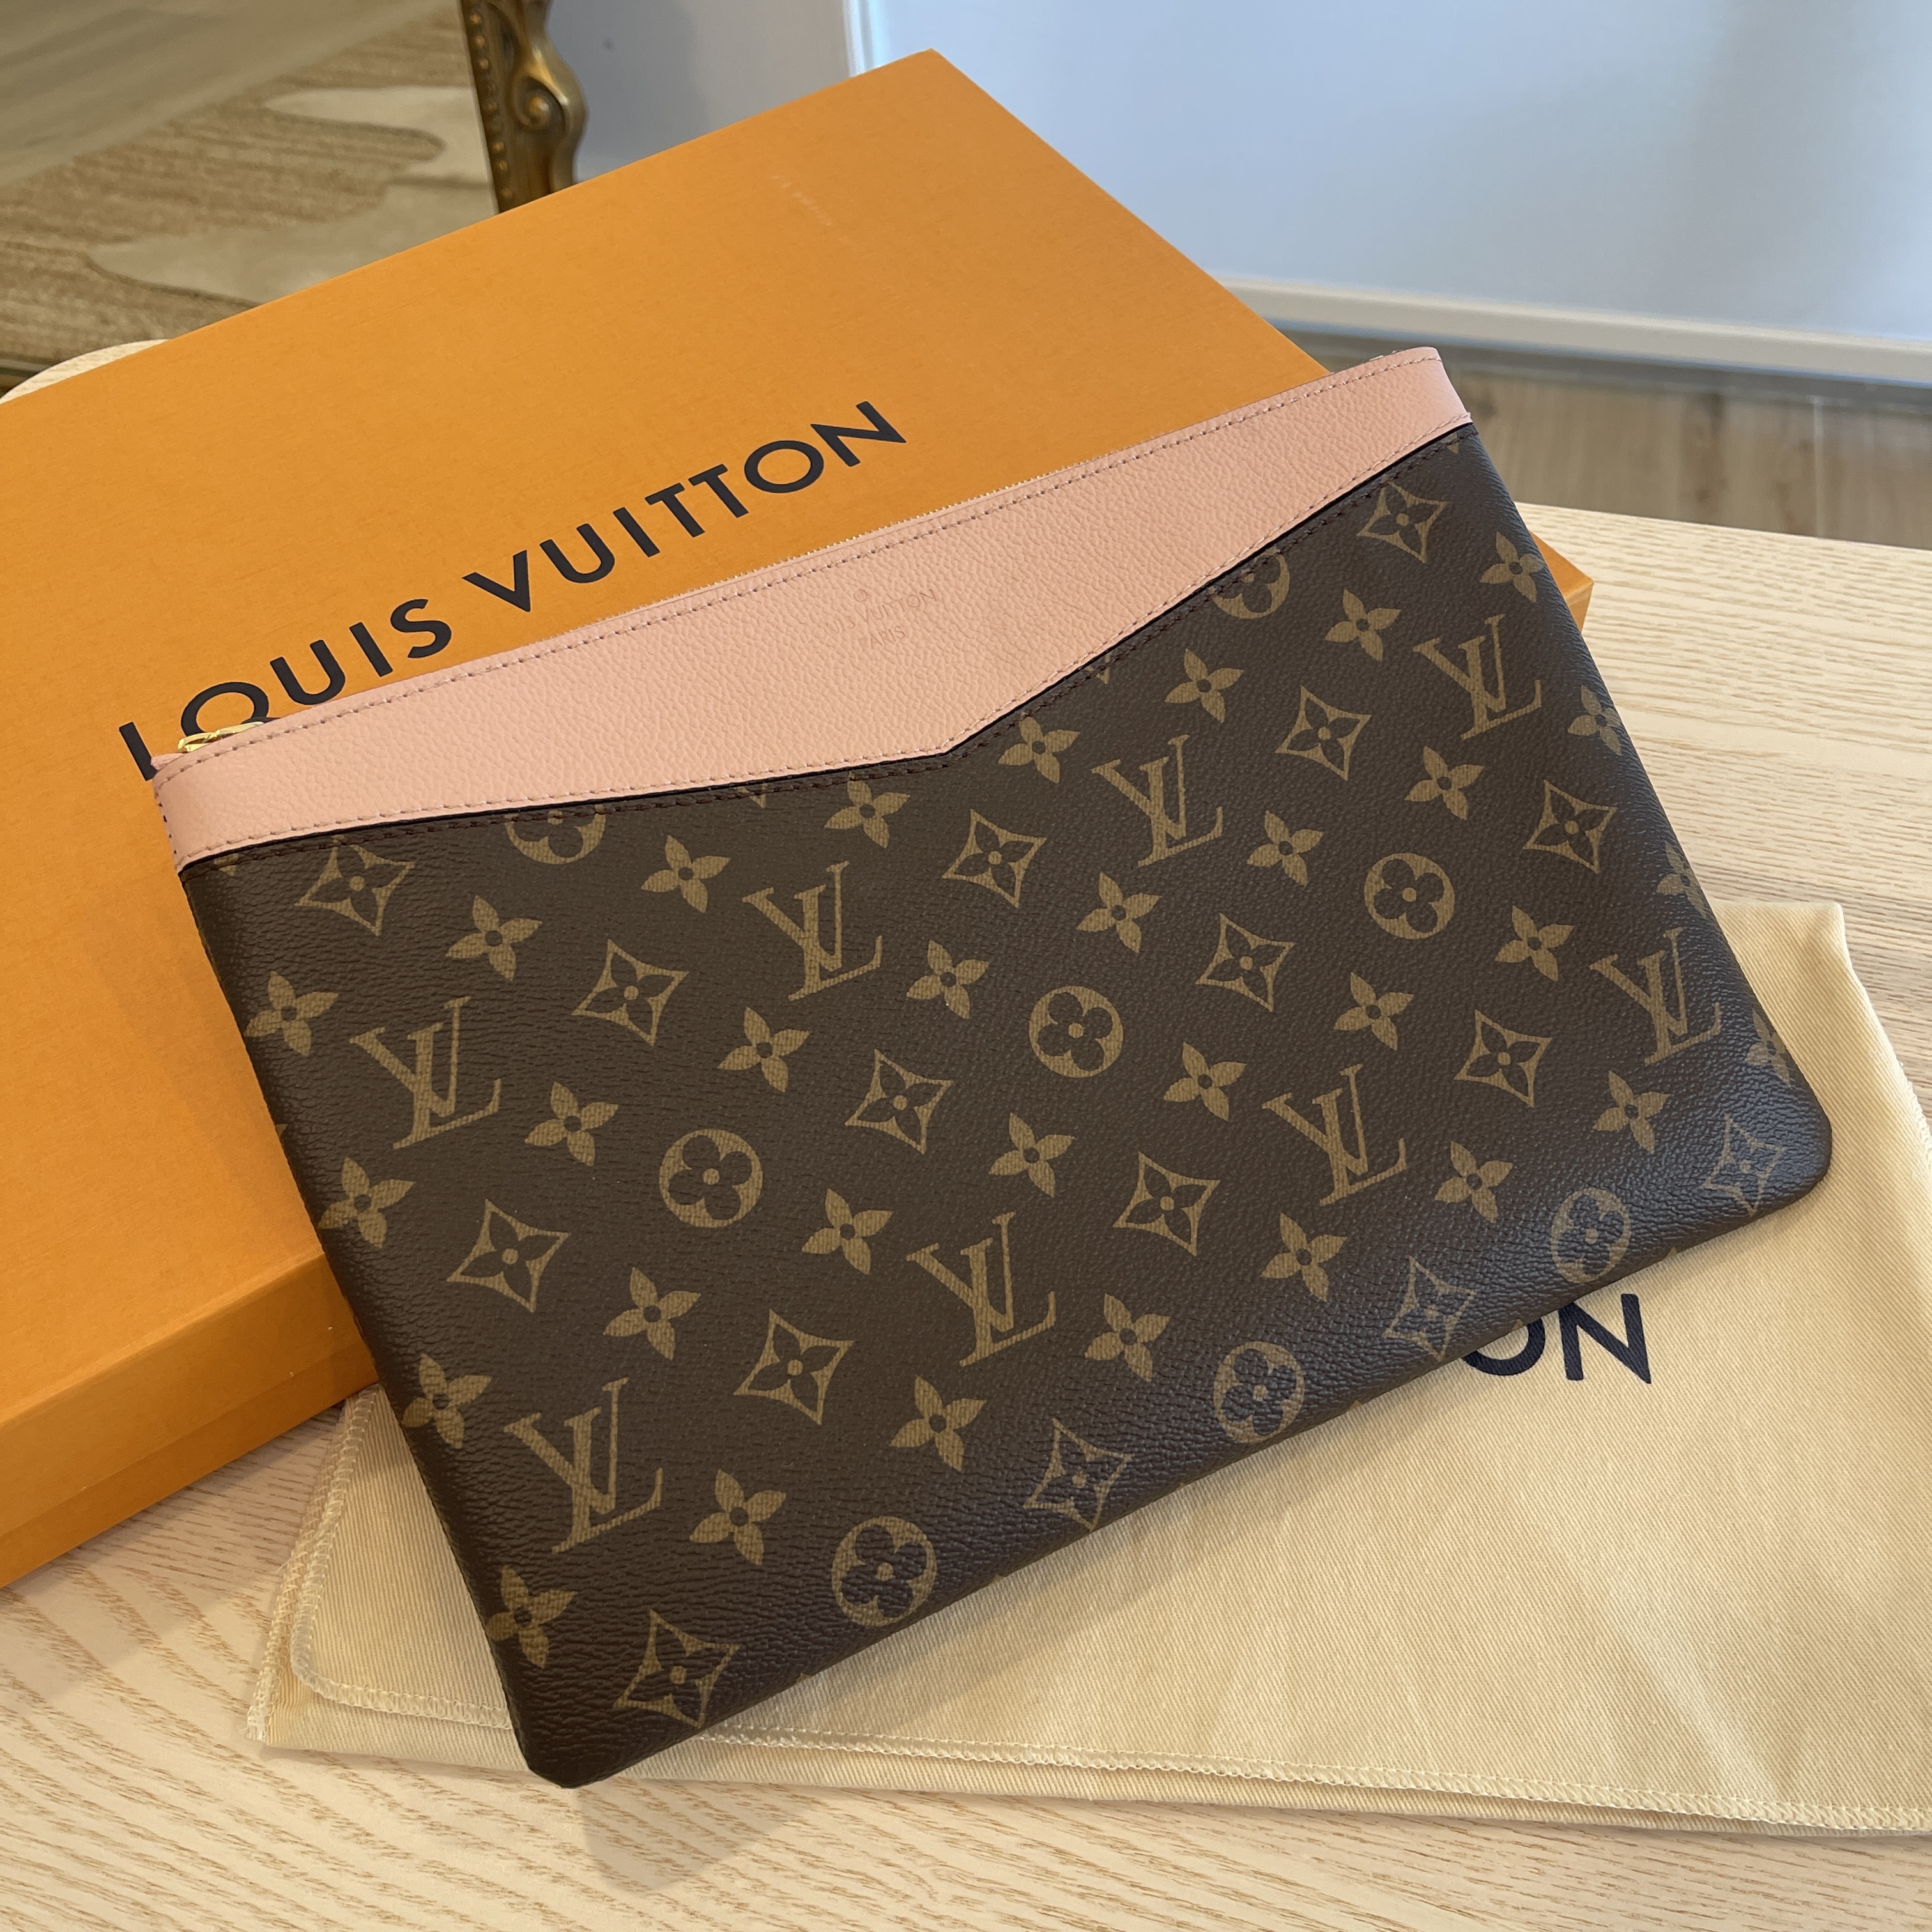 Louis Vuitton Daily Pouch. Sold Out